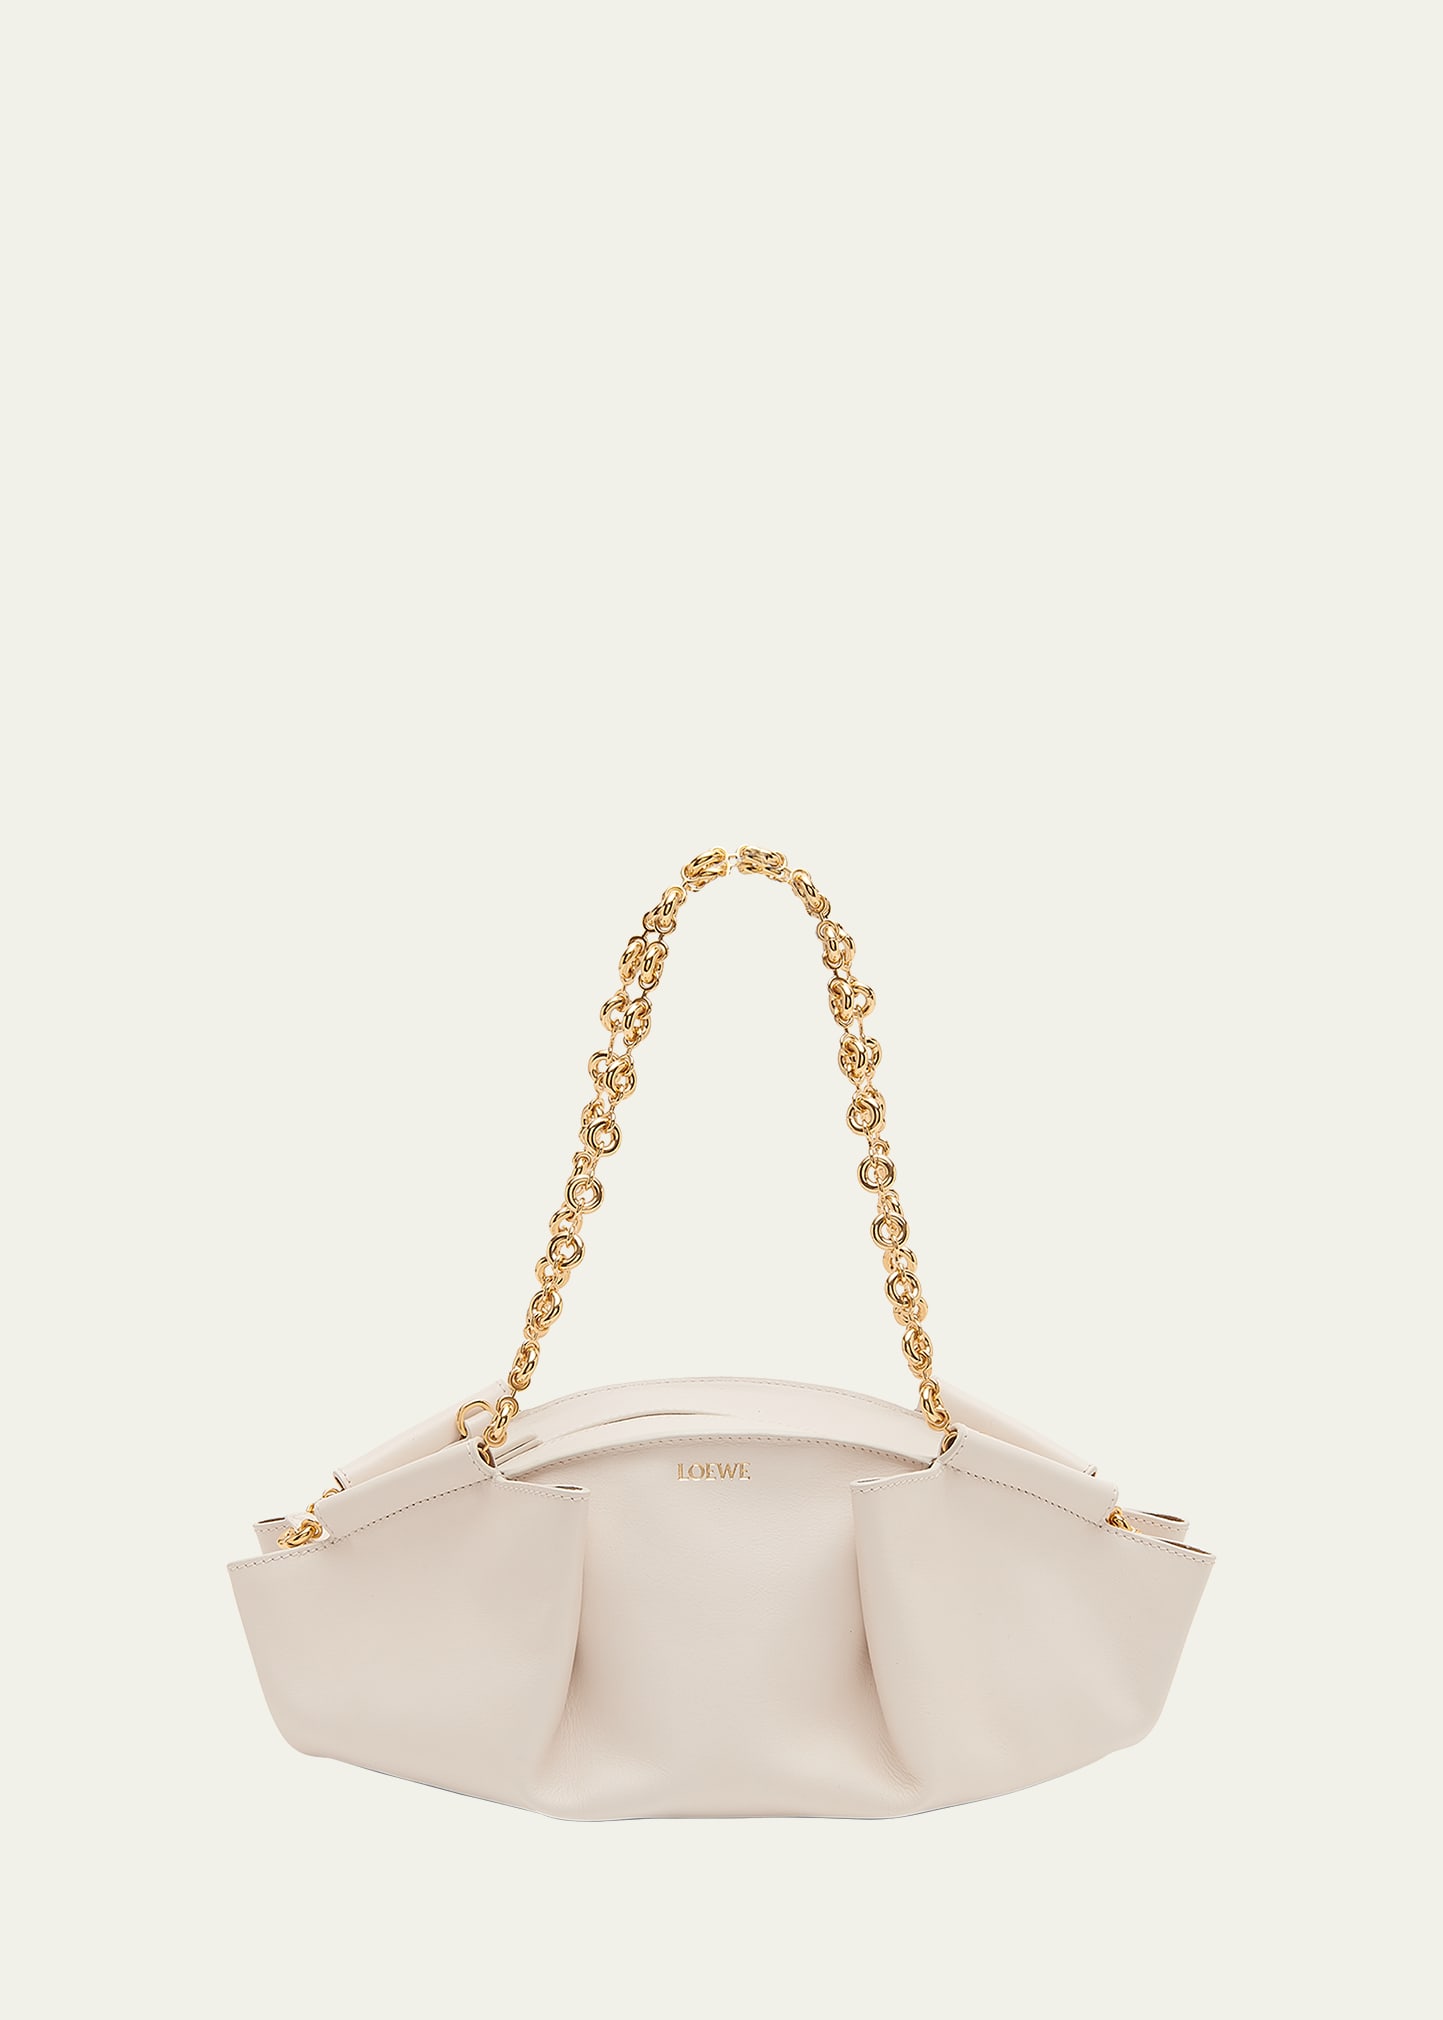 LOEWE PASEO SMALL LEATHER CHAIN SHOULDER BAG